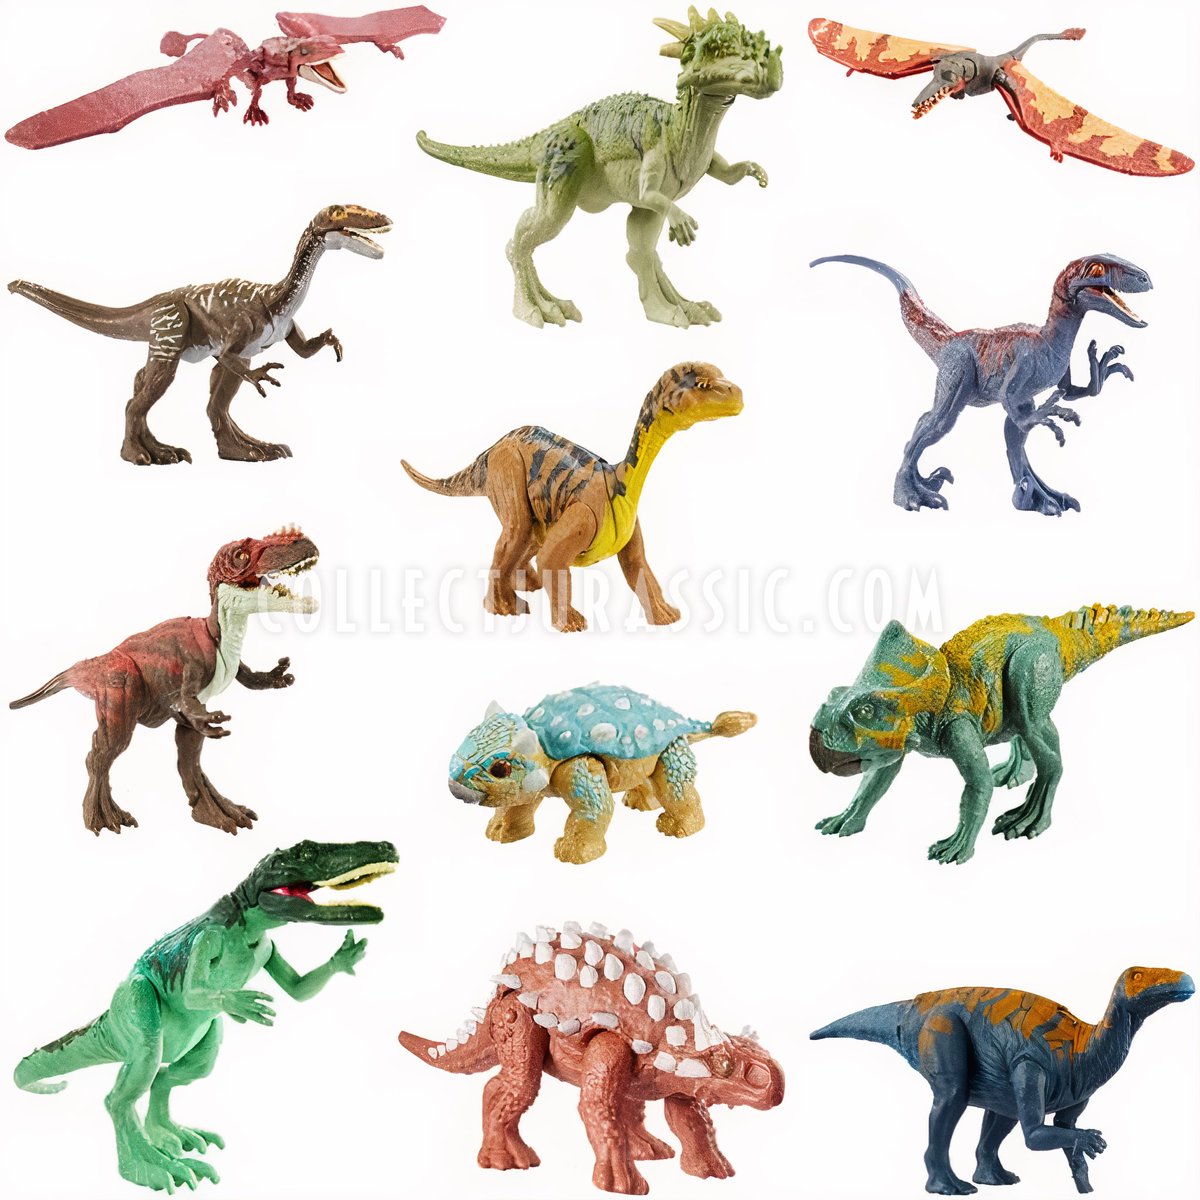 Collect Jurassic Attack Pack Fall New Figures Like Alioramus Bumby The Ankylosaurus And More Are Shown Alongside Currently Released Attack Pack Toys In This Next Official Image We Know